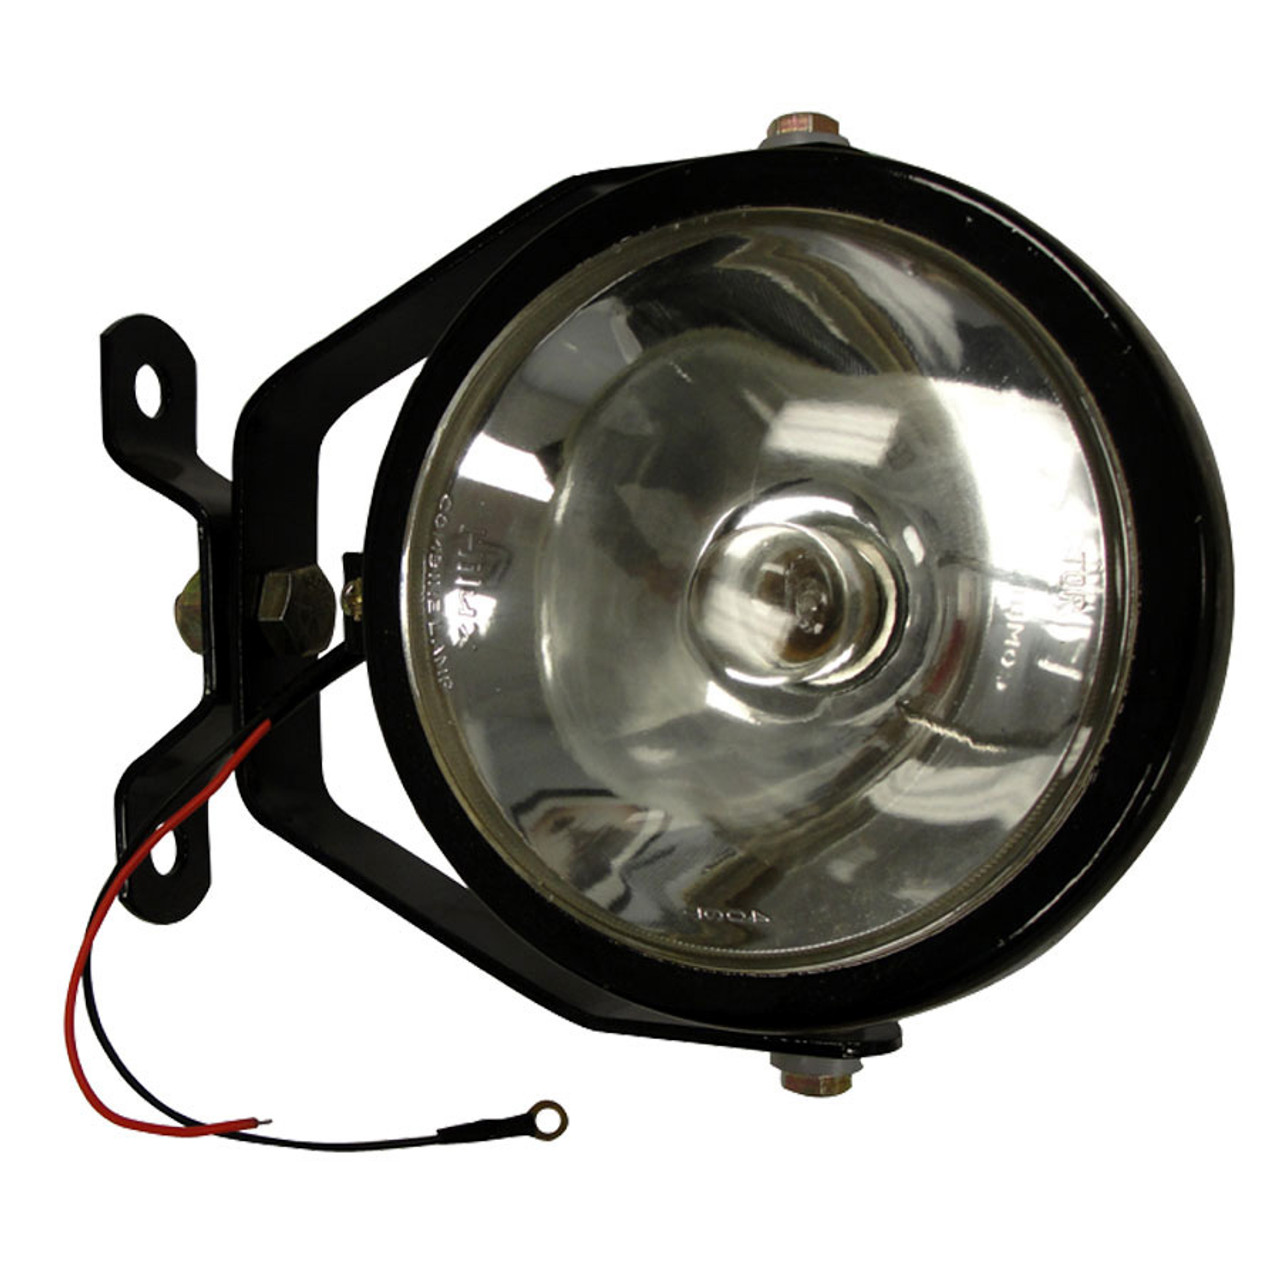 Universal Tractor Work Lamp fits Many Models